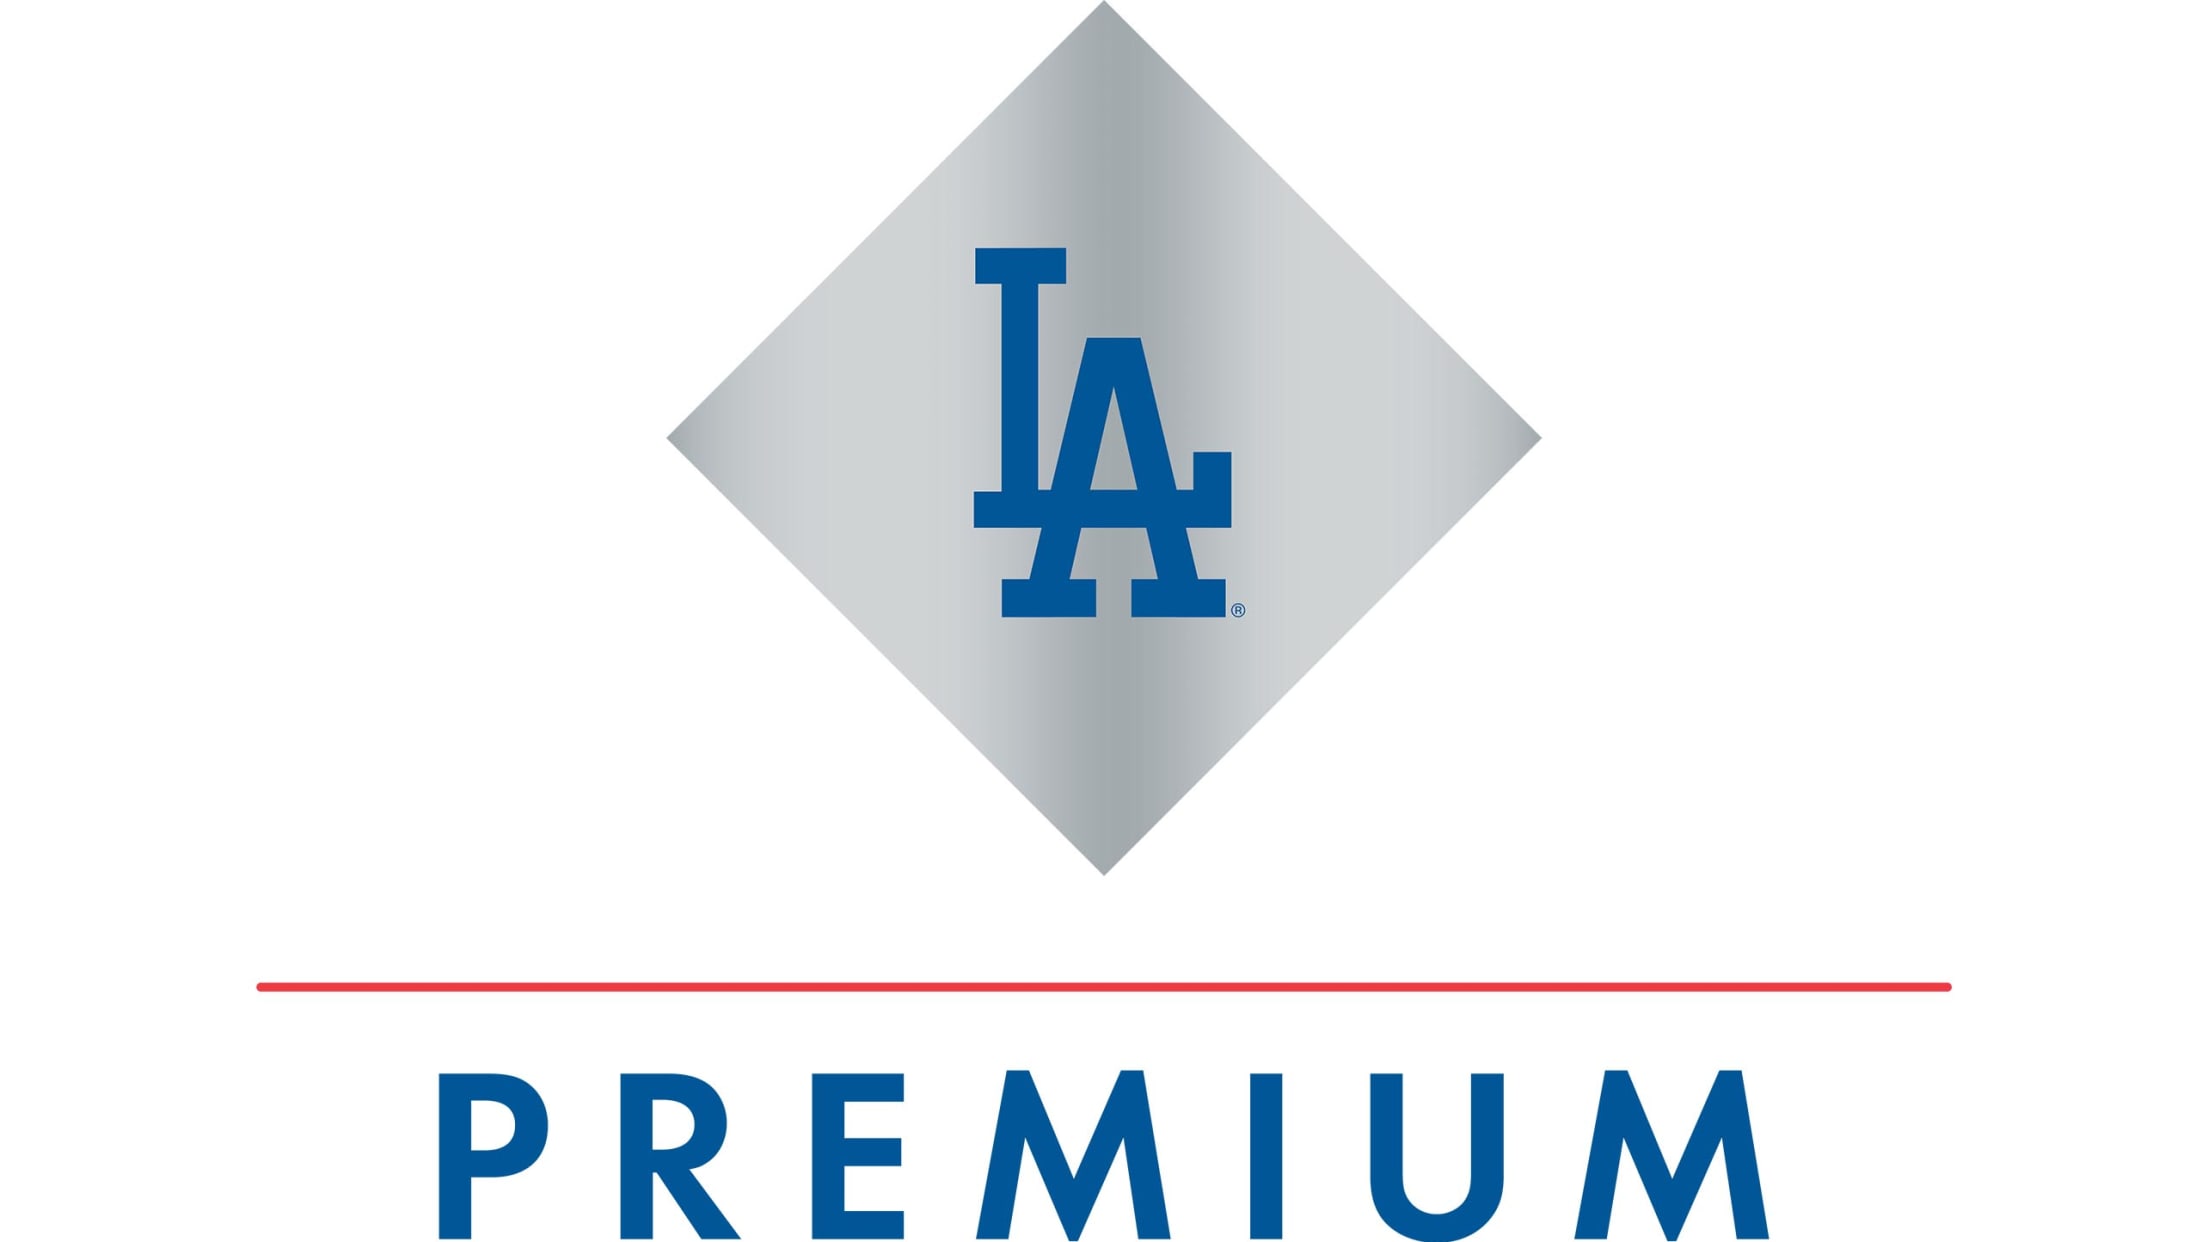 Dodgers Dugout Club Tickets A Premier MLB Experience